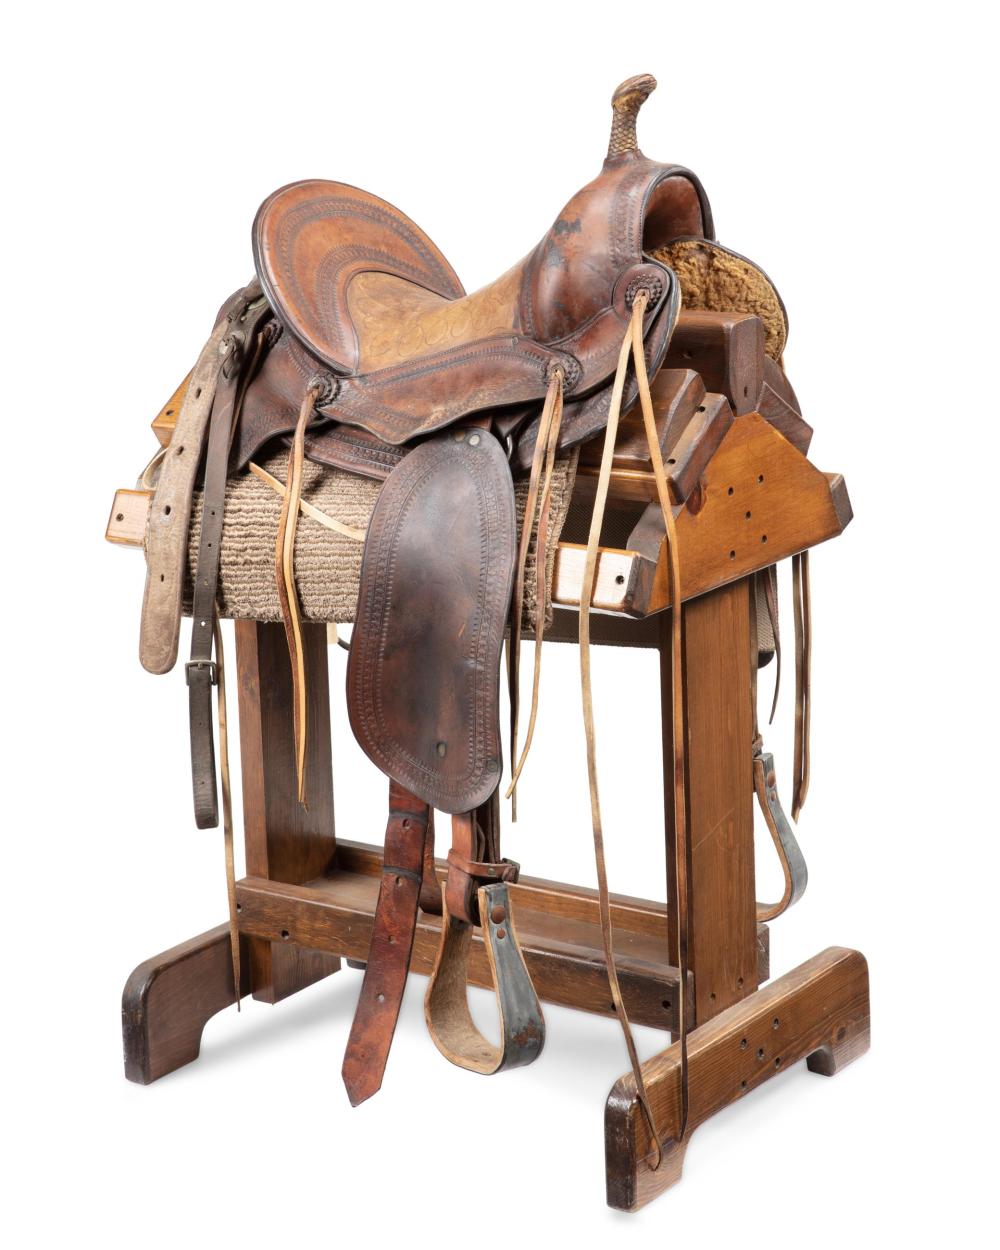 AN EARLY WESTERN SHOW SADDLE, BY THEODORE